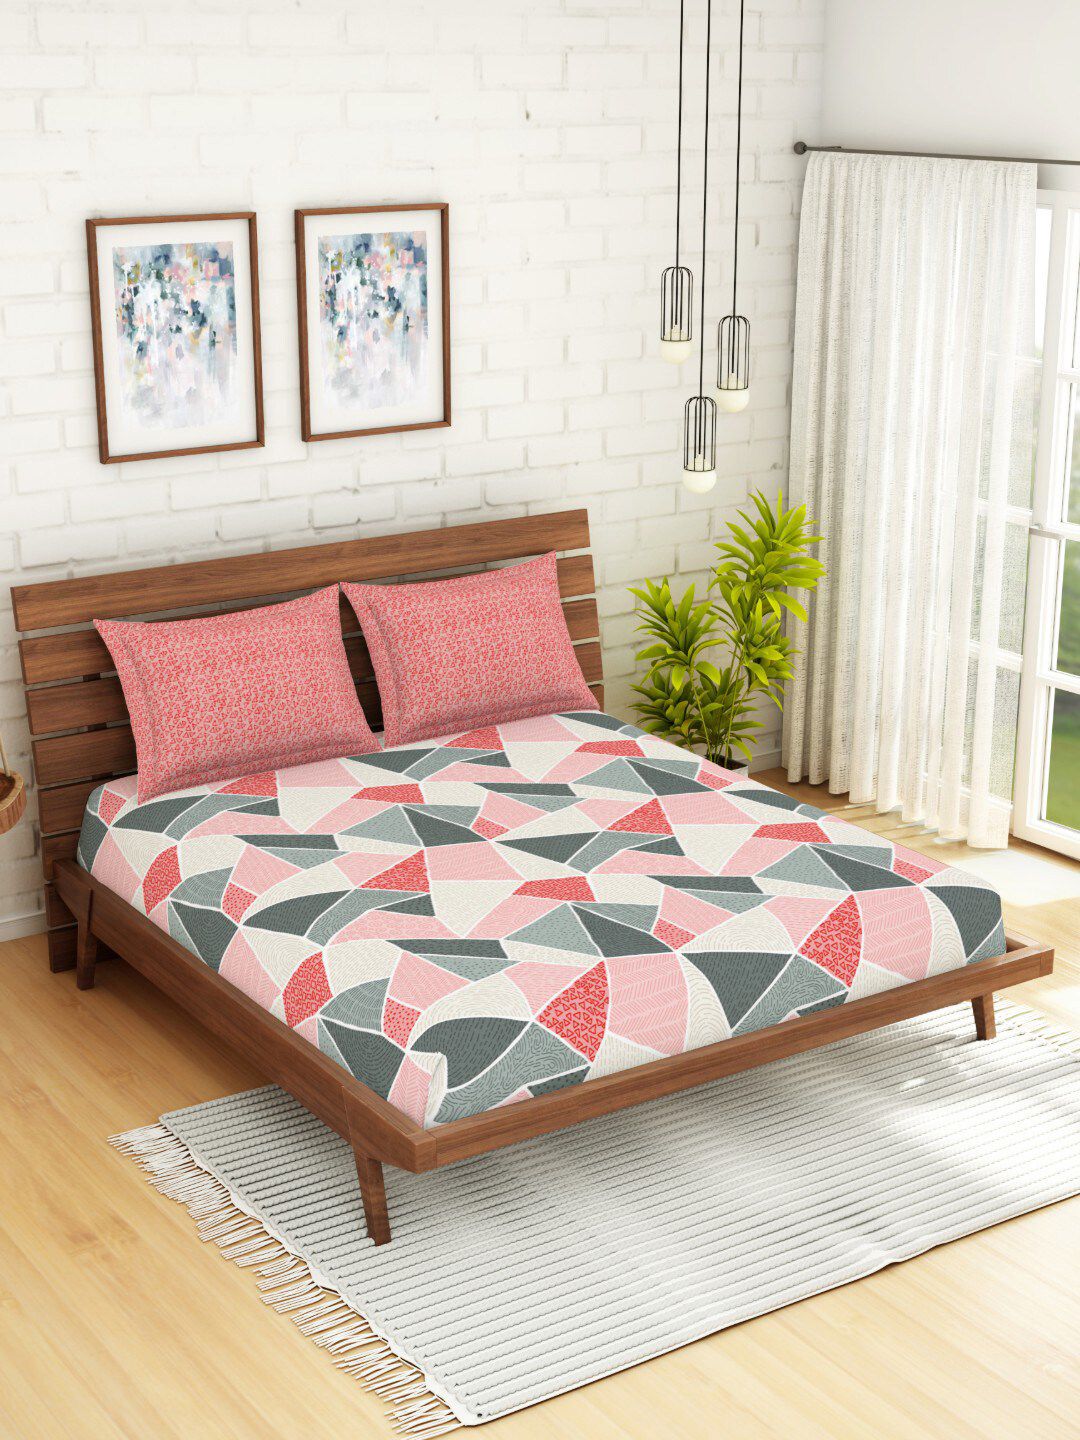 SPACES Peach & Cream Geometric Printed 144 TC Cotton Queen Bedsheet with 2 Pillow Covers Price in India